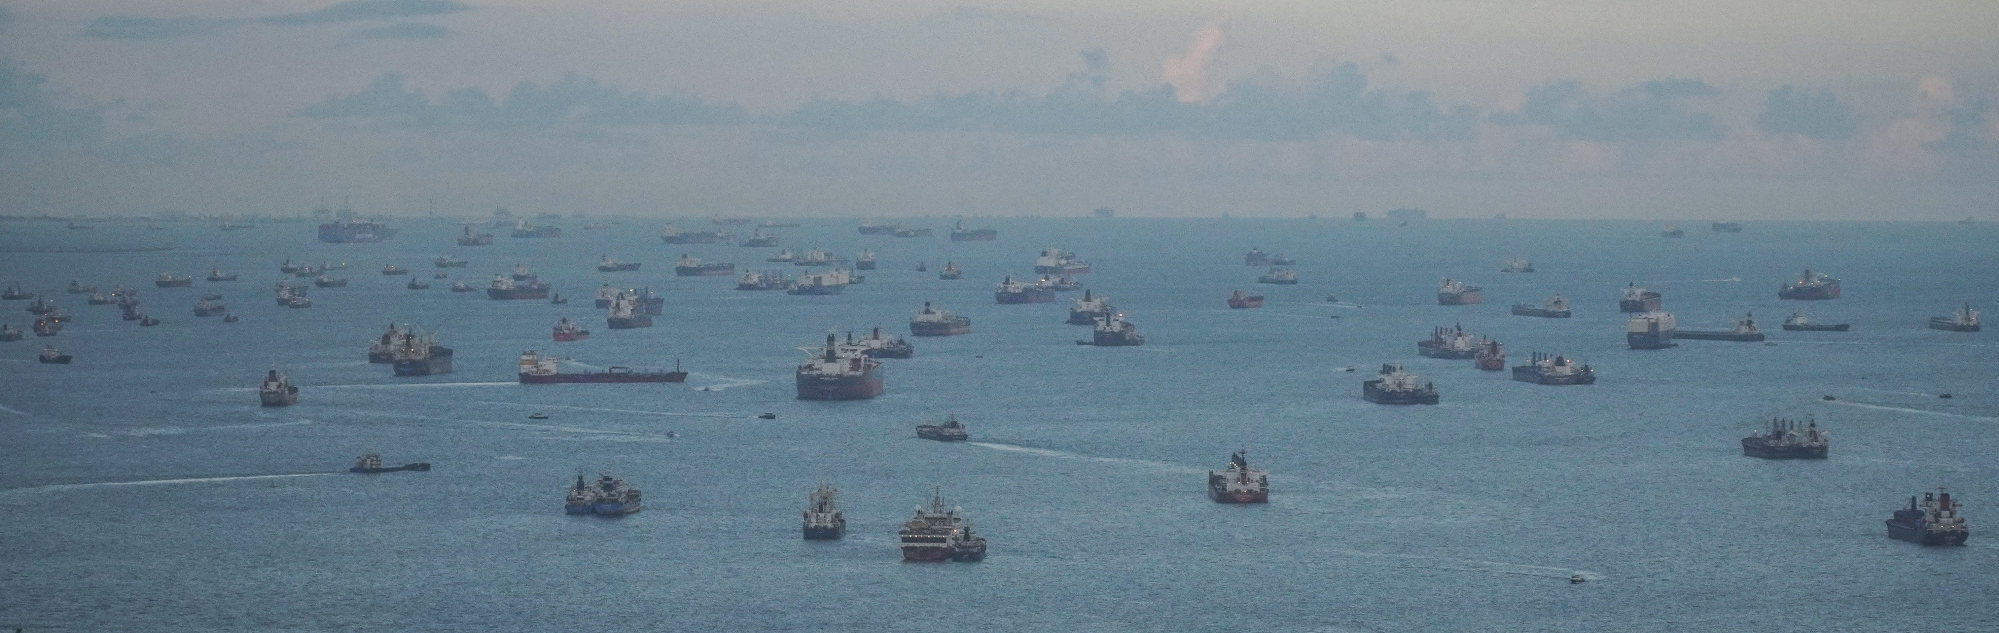 Container and cargo ships are seen passing through the Malacca Strait, the main shipping channel between the Indian Ocean and the Pacific Ocean, in 2019. Photo: Roy Issa